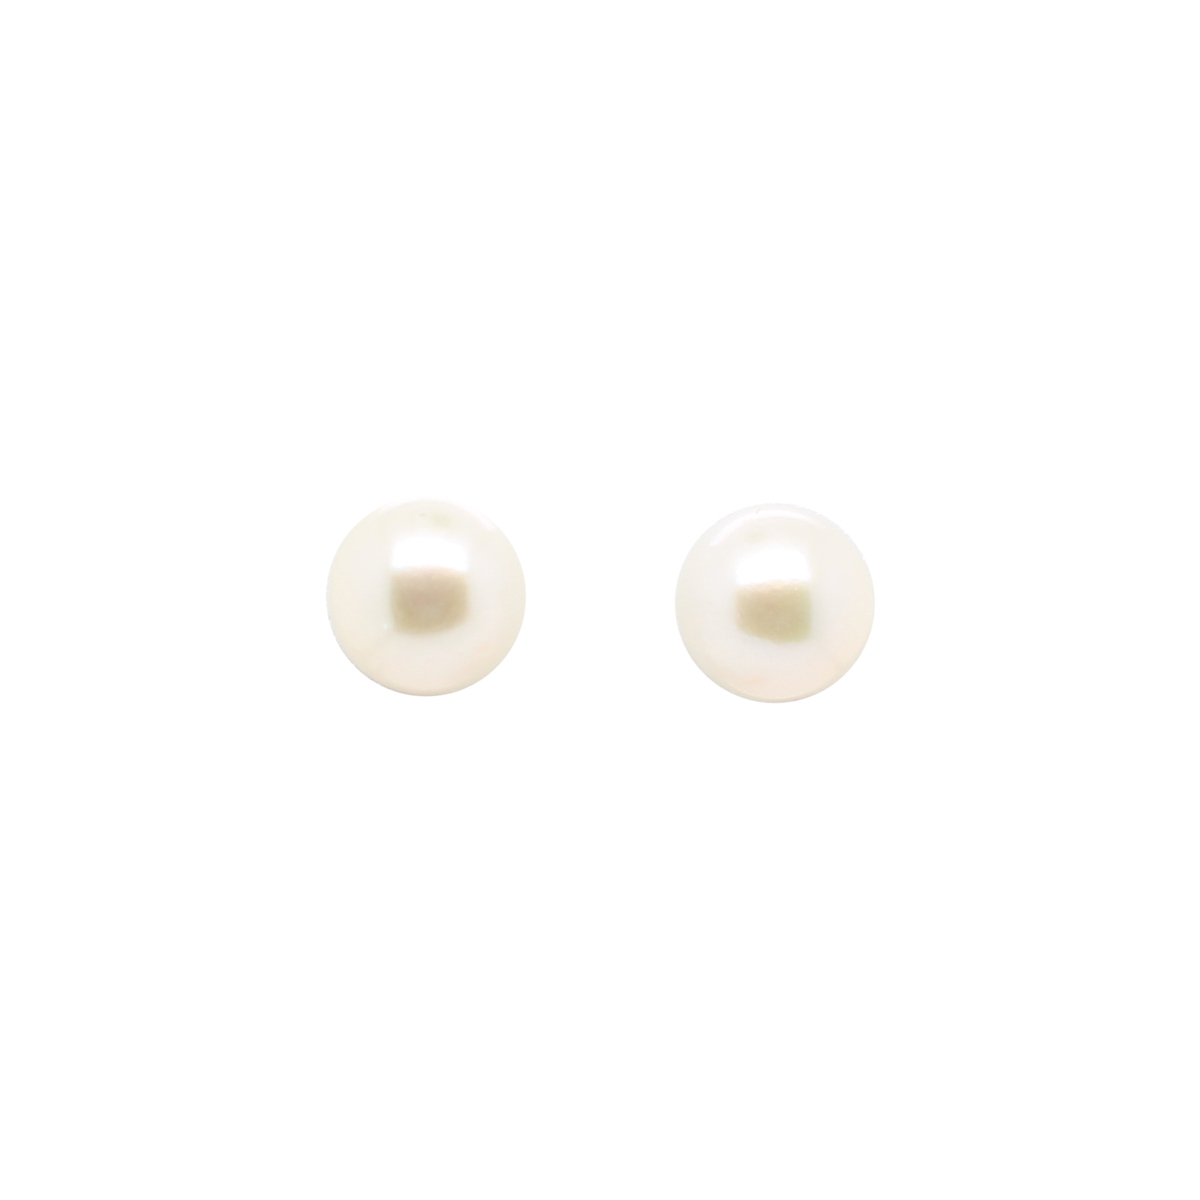 China Pearl 14 Karat White Gold  Freshwater Cultured Pearl Earrings  Each Earring Contains One Pearl Measuring 6-7Mm  Aaa Quality